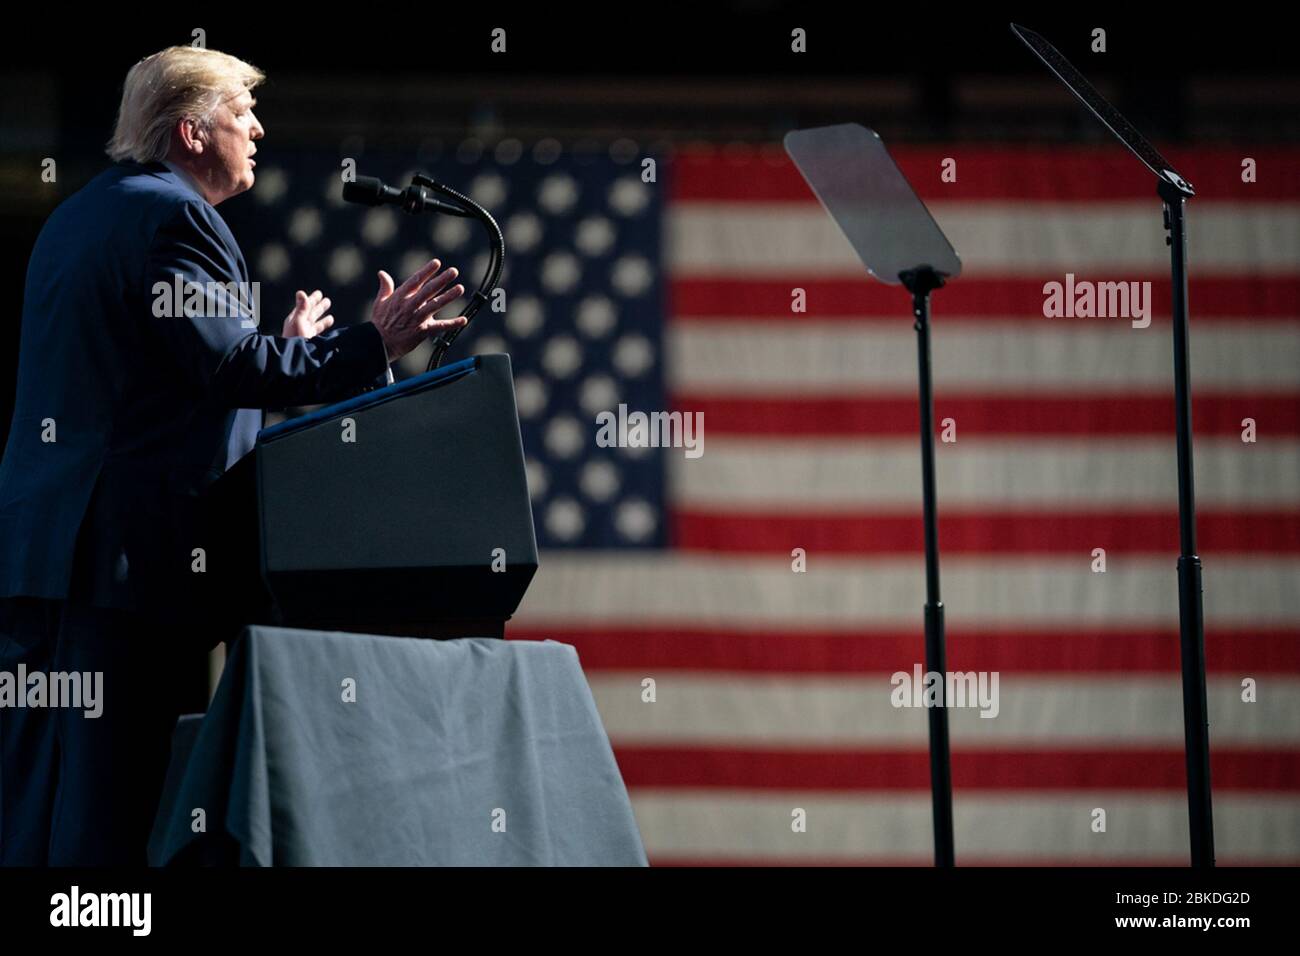 President Donald J. Trump addresses his remarks Saturday, Dec. 21, 2019, at Turning Point USA’s 5th annual Student Action Summit at the Palm Beach County Convention Center in West Palm Beach, Fla. President Trump Delivers Remarks at TPUSA Stock Photo